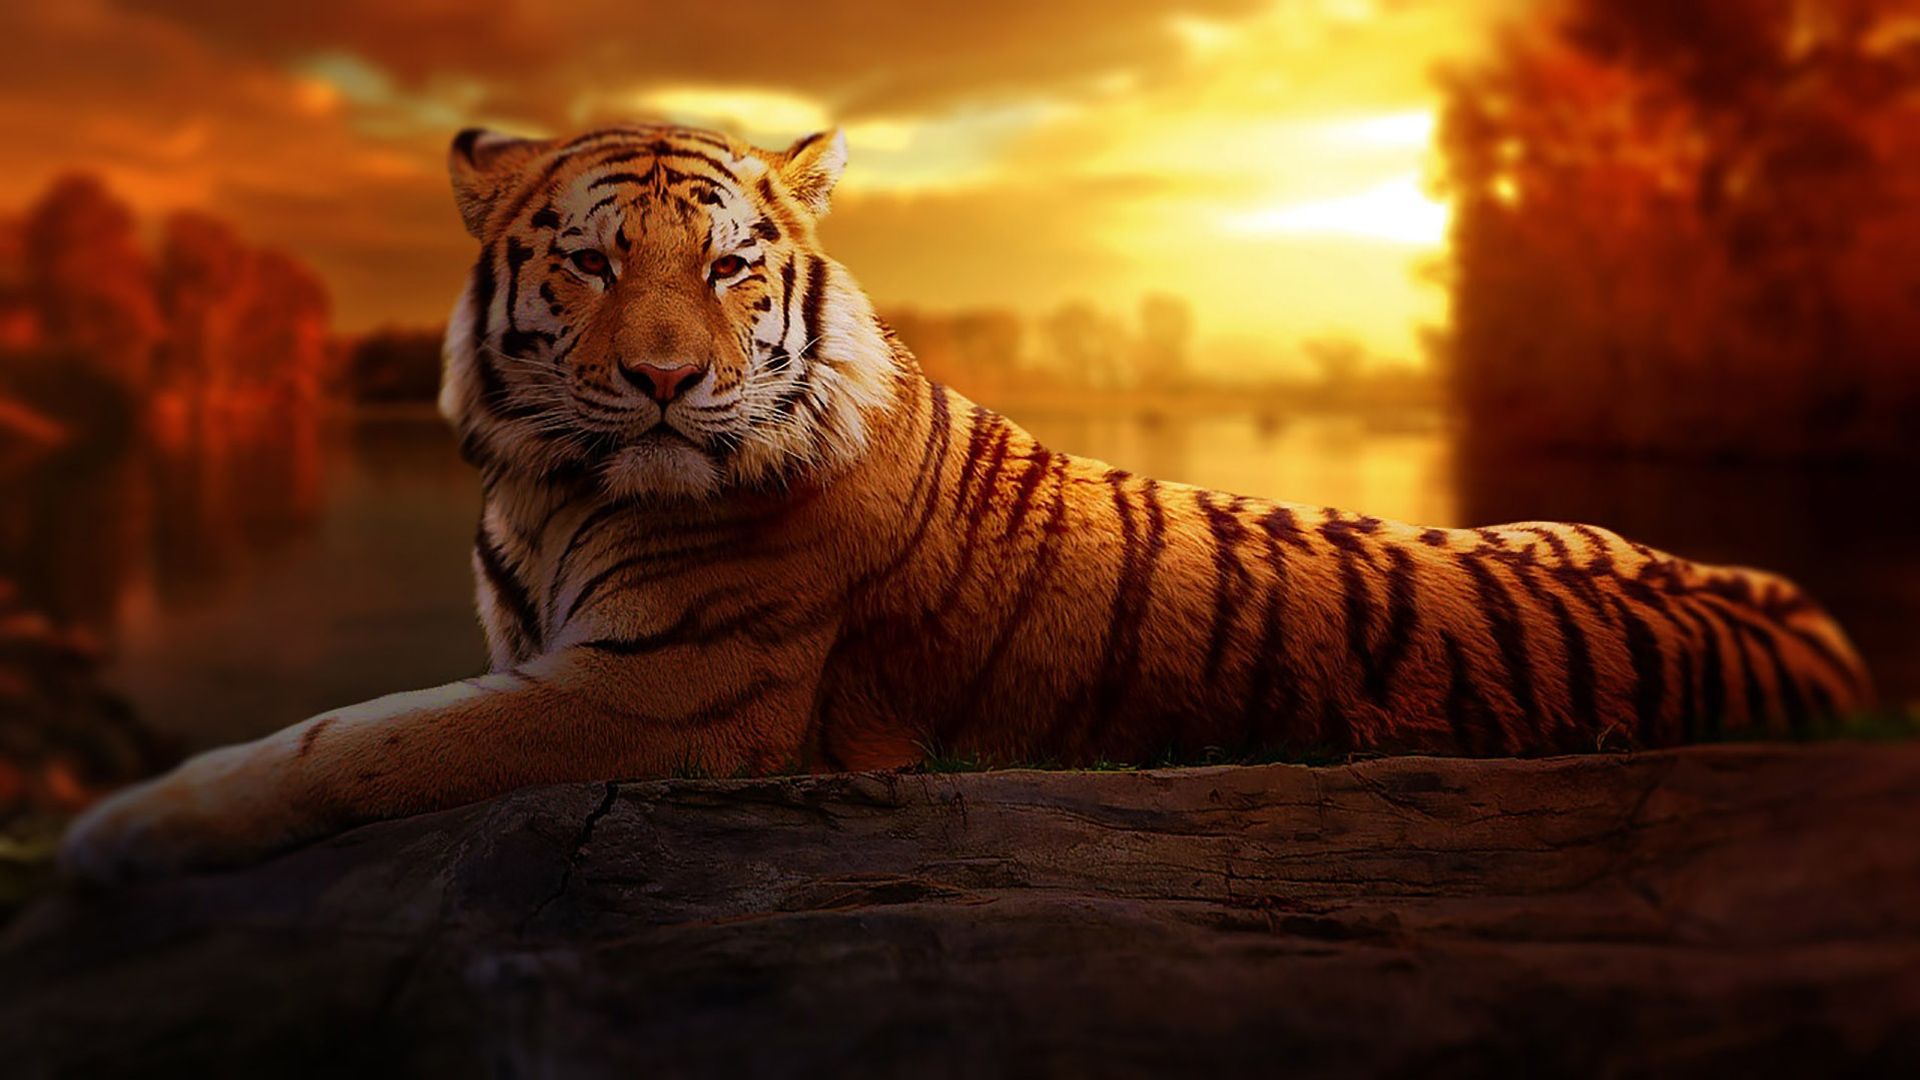 tiger picture download